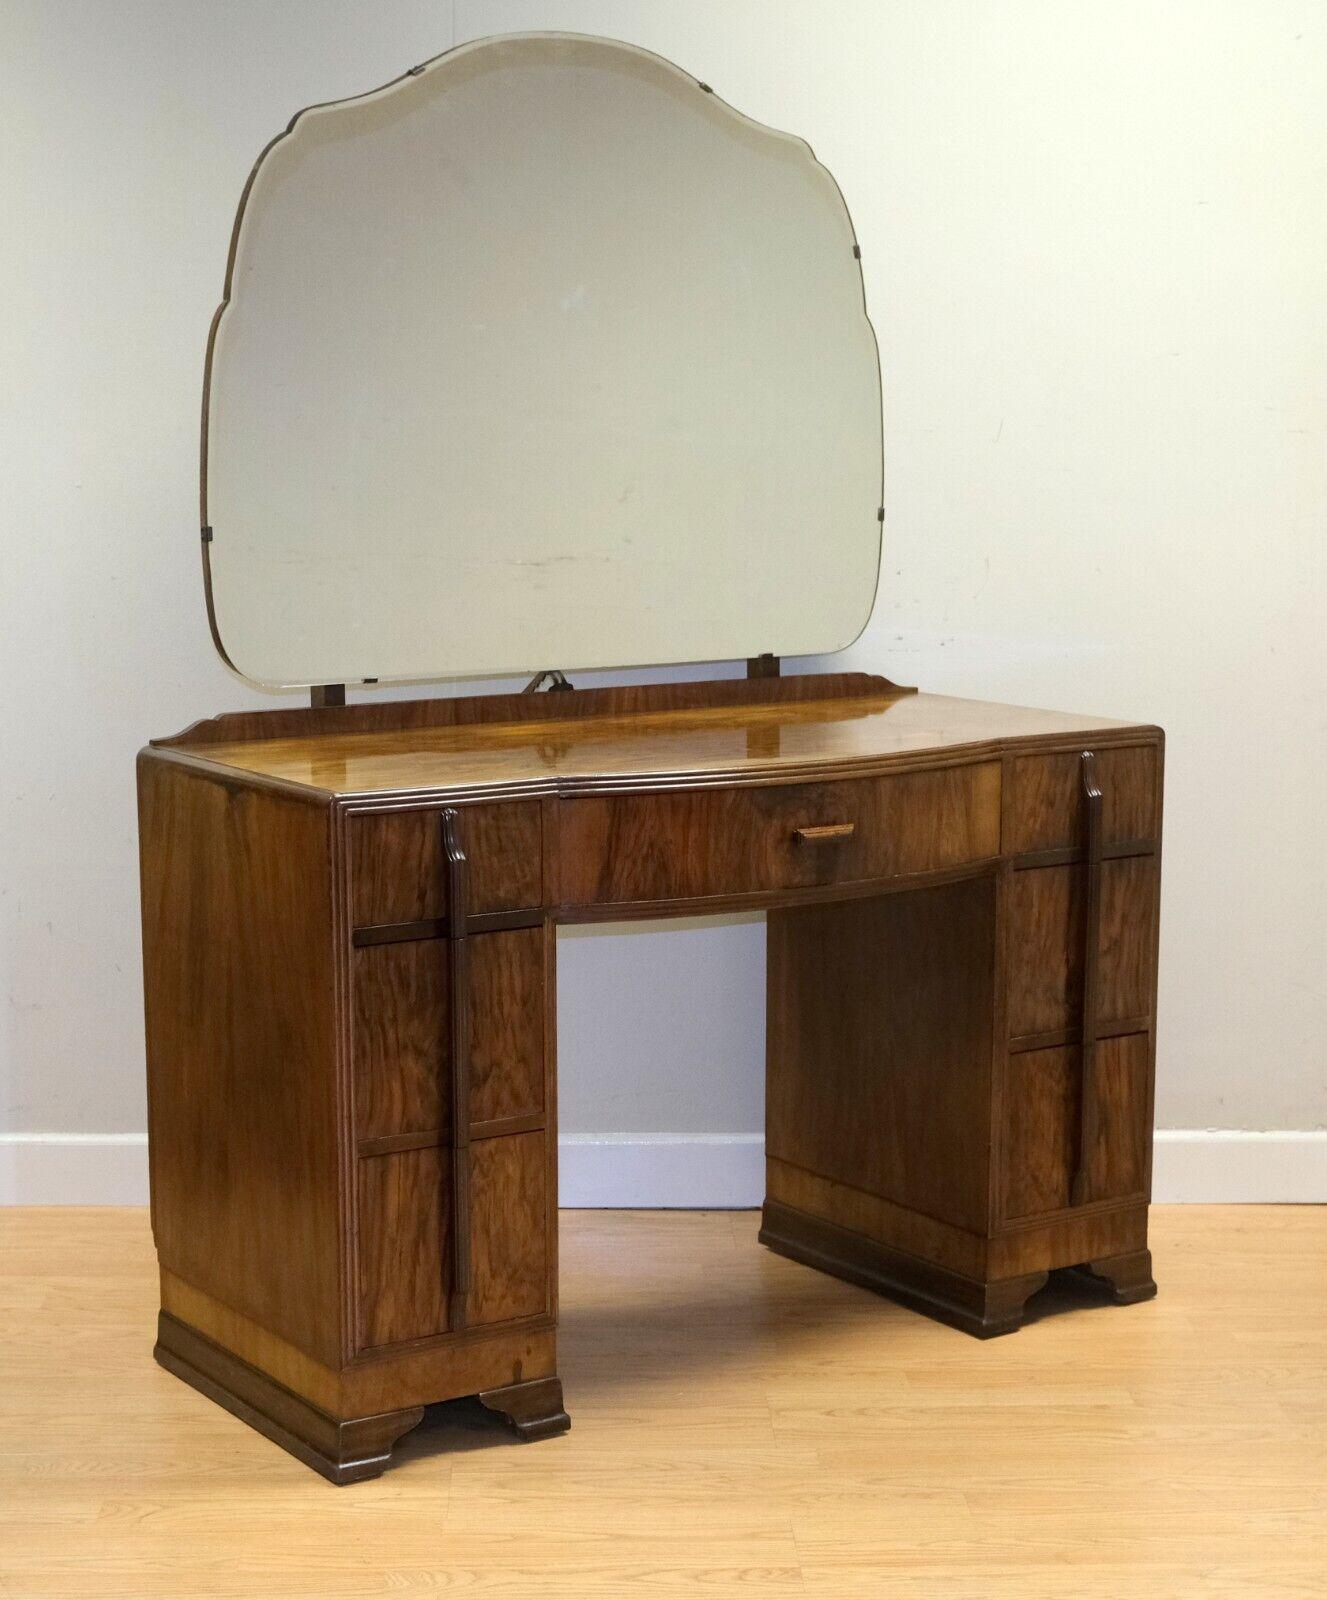 We are delighted to offer for sale this stunning 1920's Art Deco burr walnut dressing table with mirror and drawers.

This piece offers you a nice colour with original handles from the 1920's Art Deco period. This dressing table is a well made,